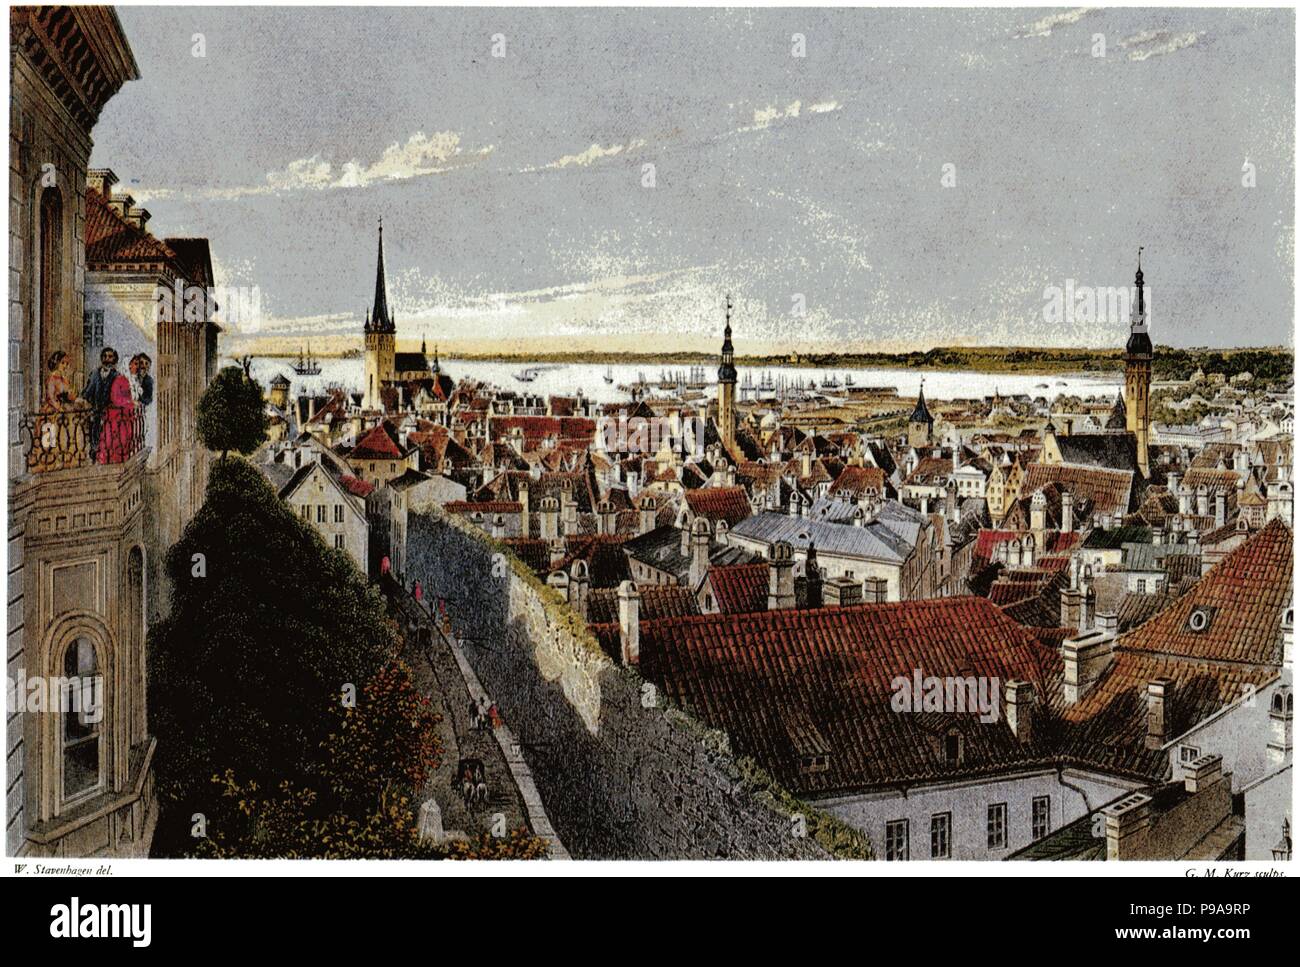 View of Reval. Museum: PRIVATE COLLECTION. Stock Photo